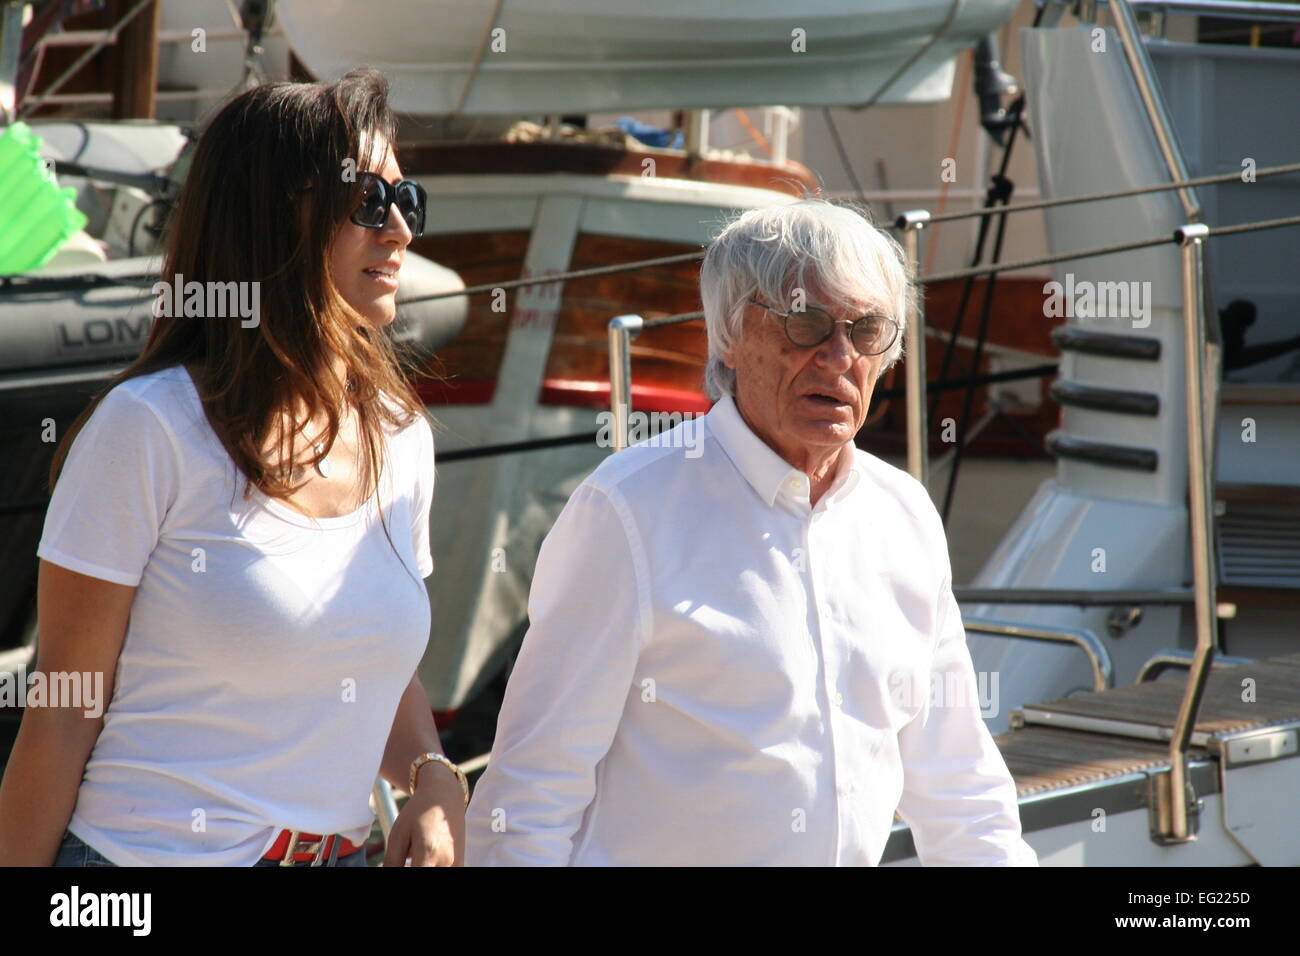 The boss of F1, Bernie Ecclestone, enjoyed a stroll around the port of Gruz with his wife Fabiana Flosi. The couple have been holidaying aboard Bernie's luxury yacht Petara. Ecclestone had been on trial in Munich, accused of bribery involving the sale of an F1 stake to CVC Partners in 2005-06, but walked free from the court after the judge accepted a record $100m offer to settle the charges. The presiding judge, Peter Noll, announced that the court would accept the settlement offer, with $99m going into the coffers of the Bavarian state and $1m to a children’s charitable foundation.  Featuring Stock Photo